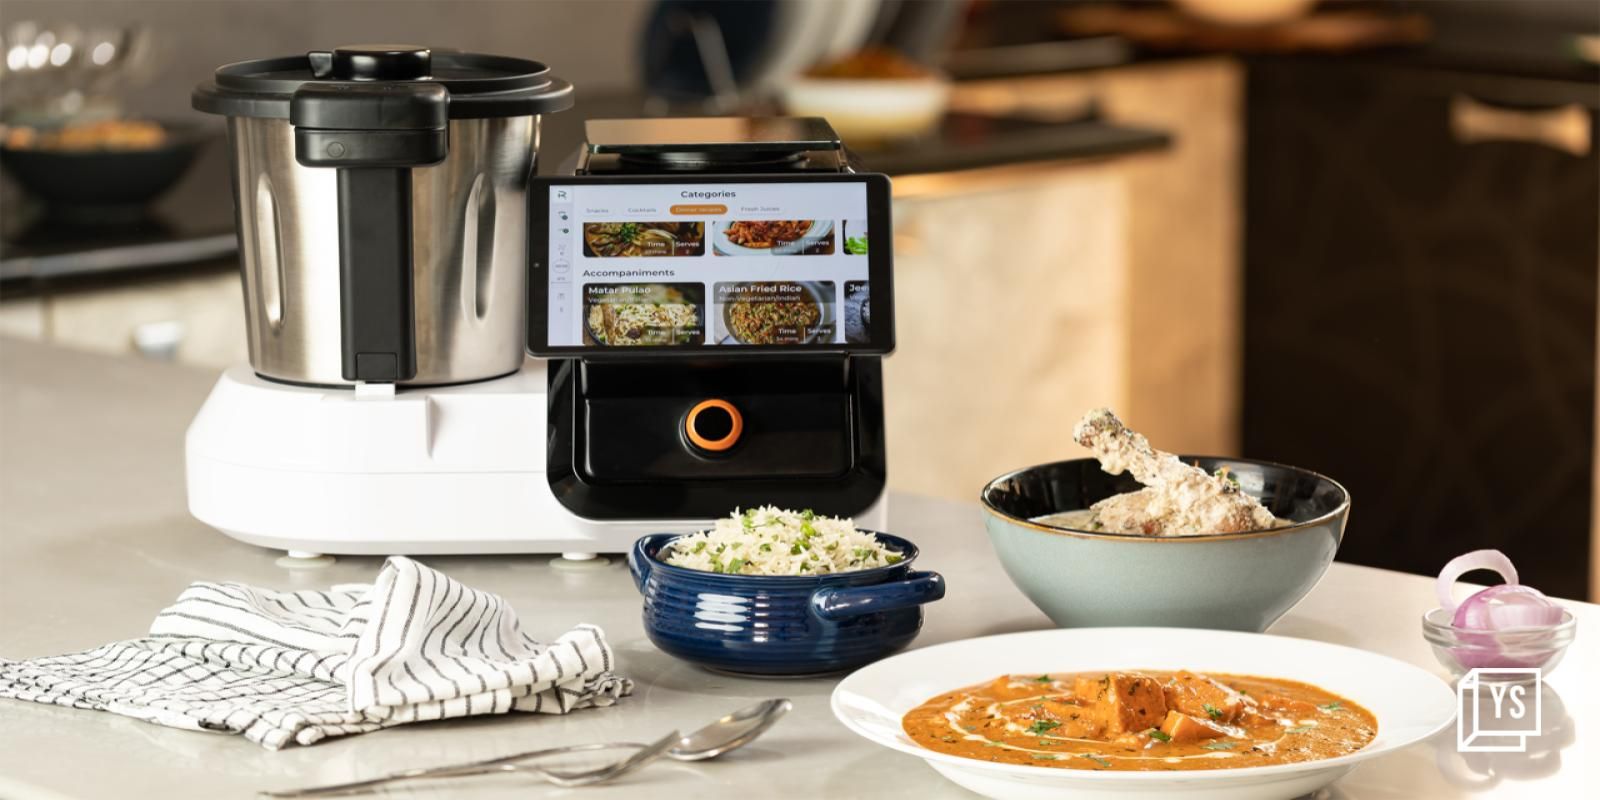 Backed by Zerodha’s Nithin Kamath, this smart appliance is catering to Indian cooking needs